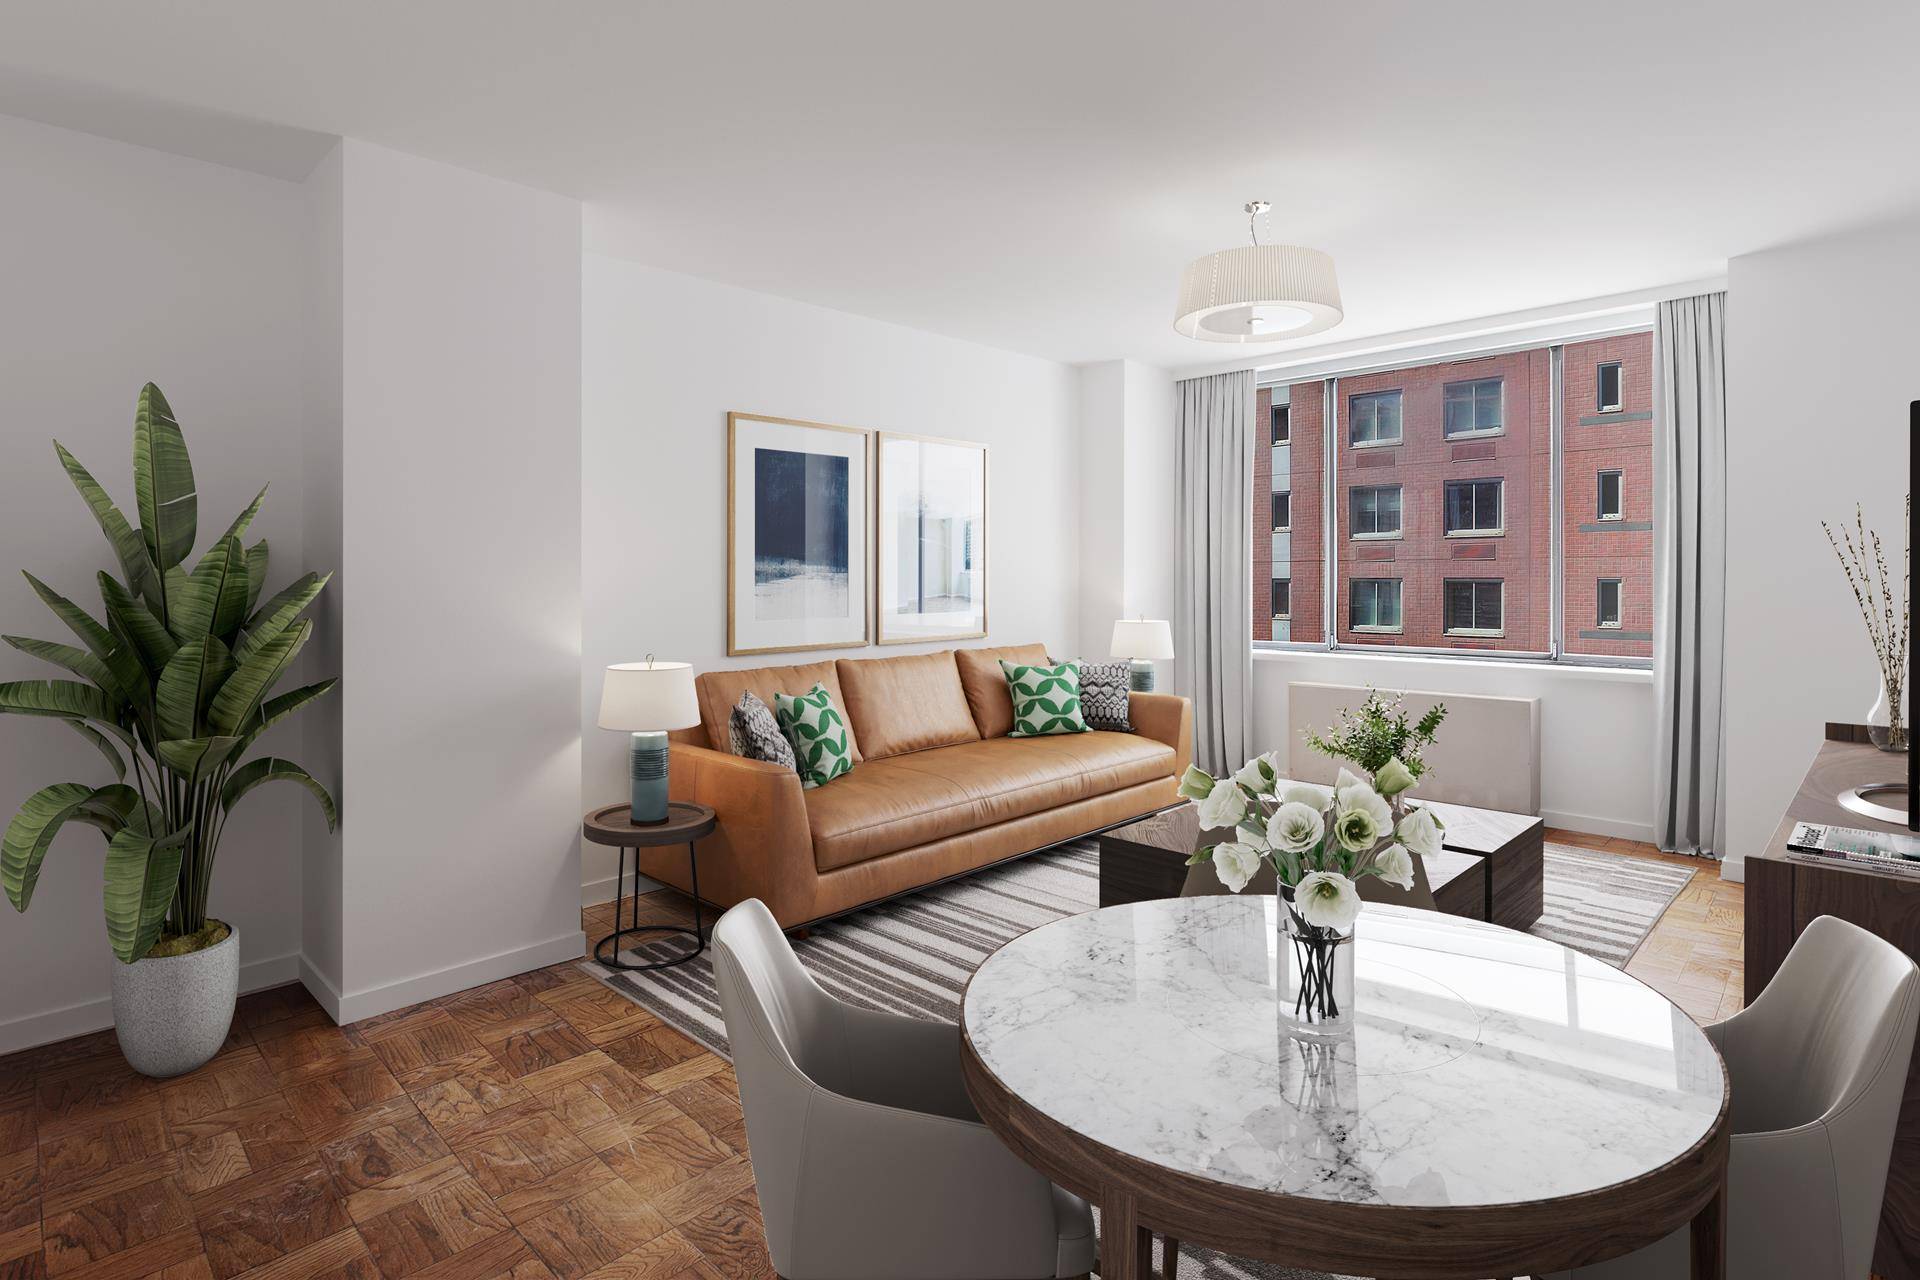 Elevated One Bedroom Renovated Kitchen Marble Bathroom Private Outdoor SpaceWelcome to city living in this spacious 1BR 1BA condo in Murray Hill.